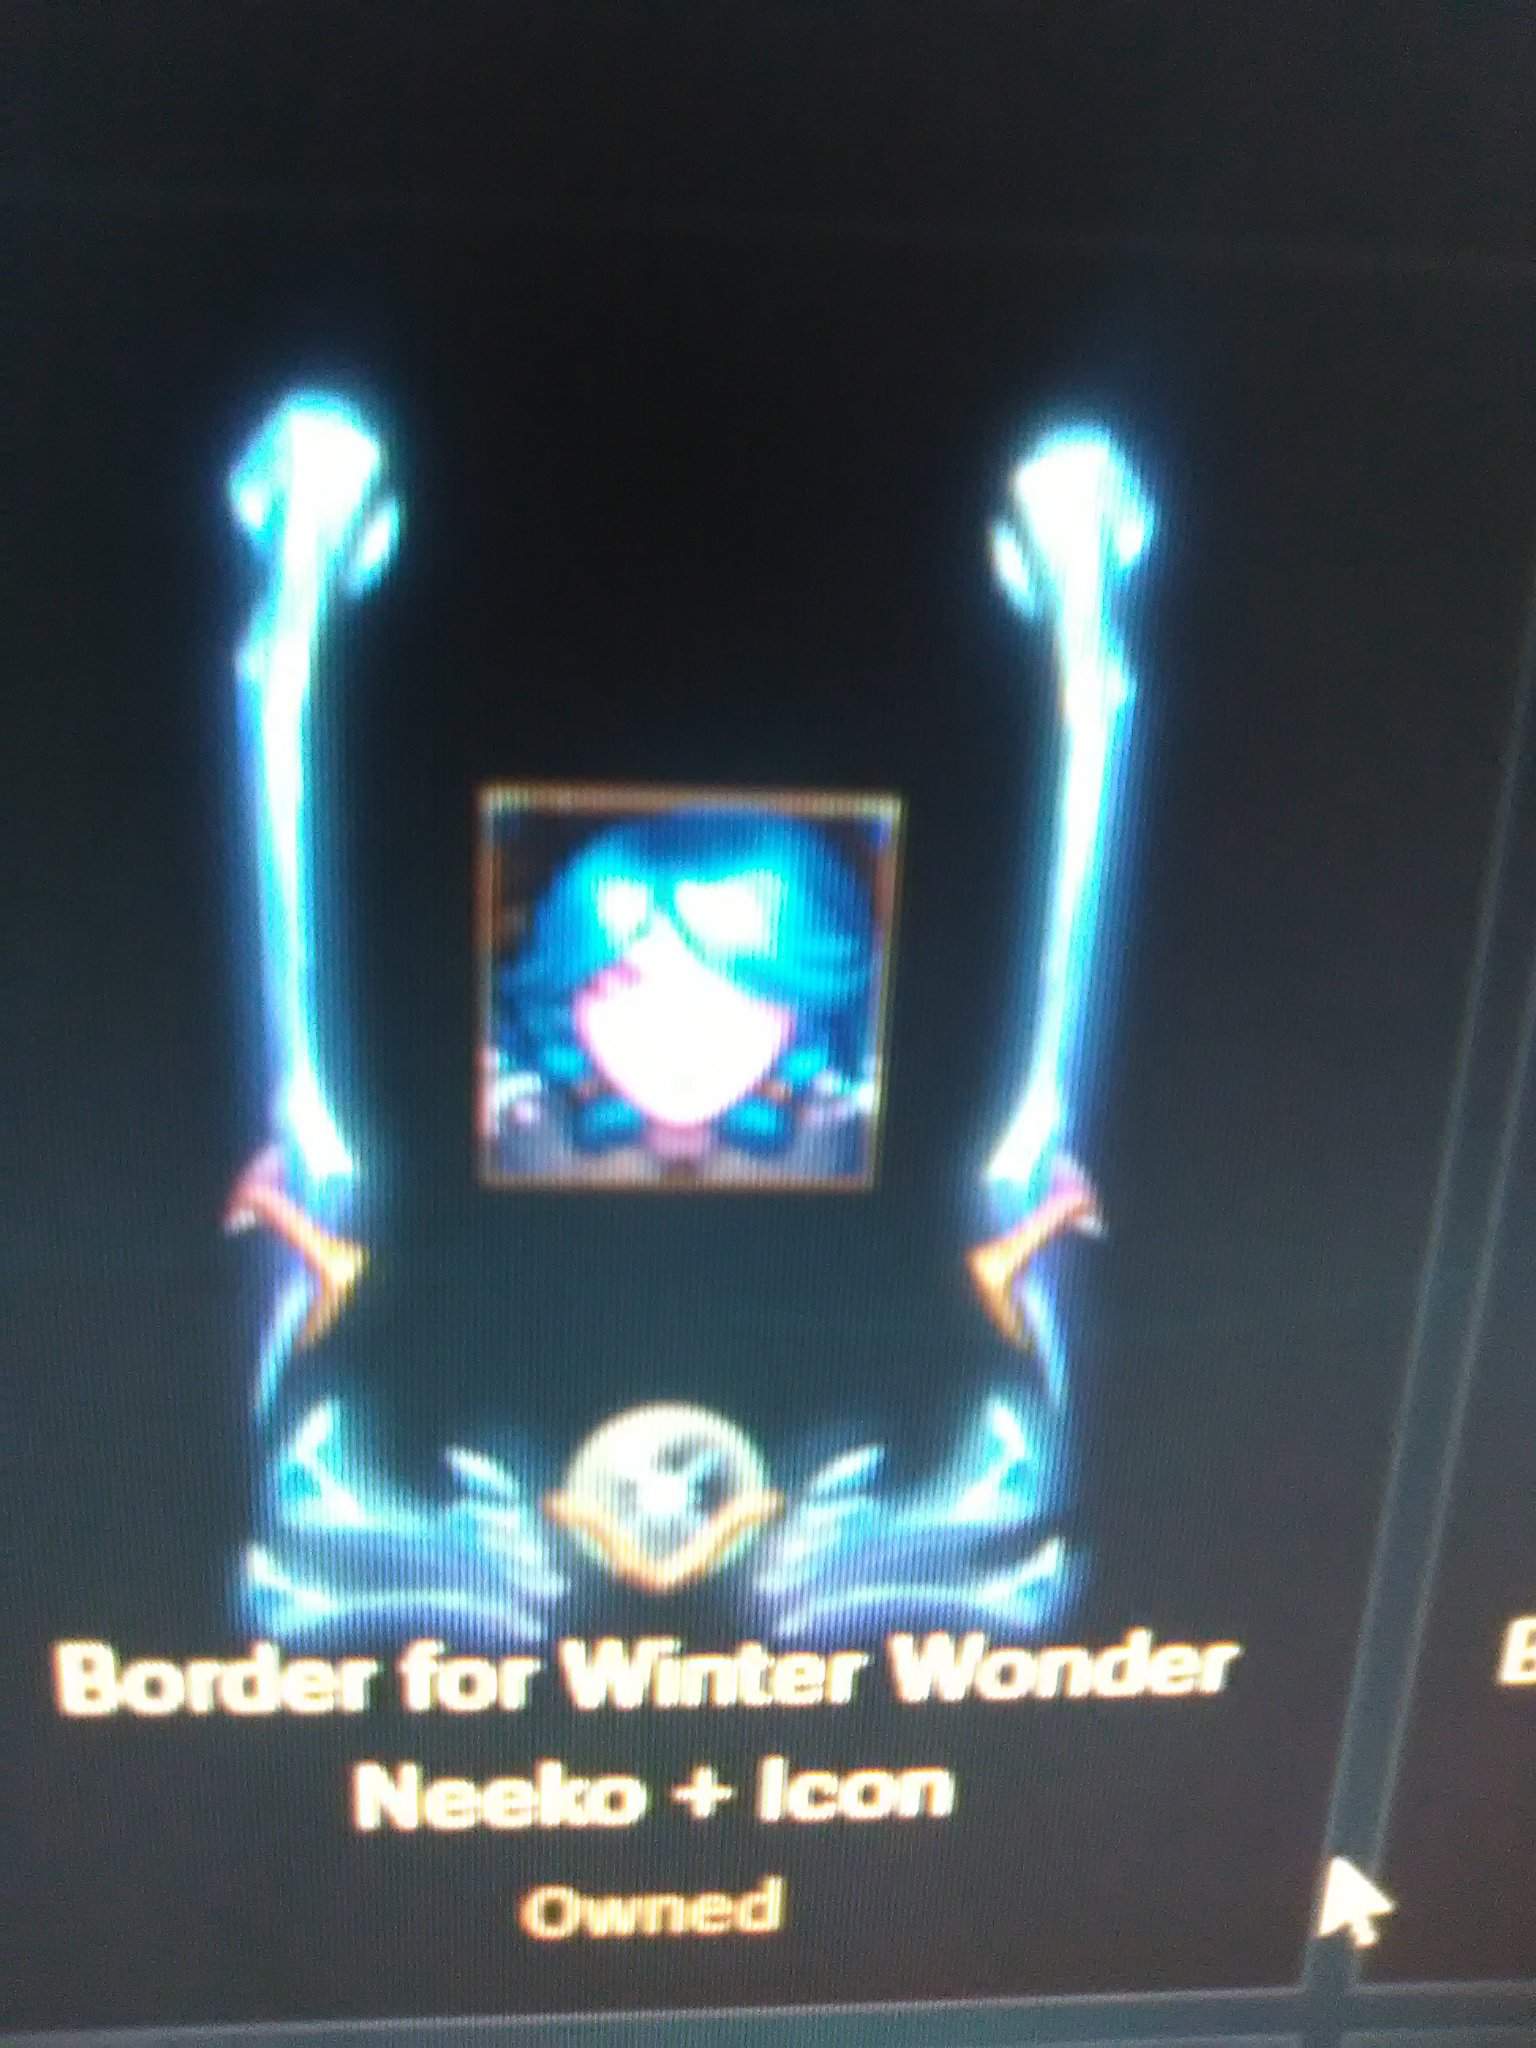 league-of-legends-skin-border-not-showing